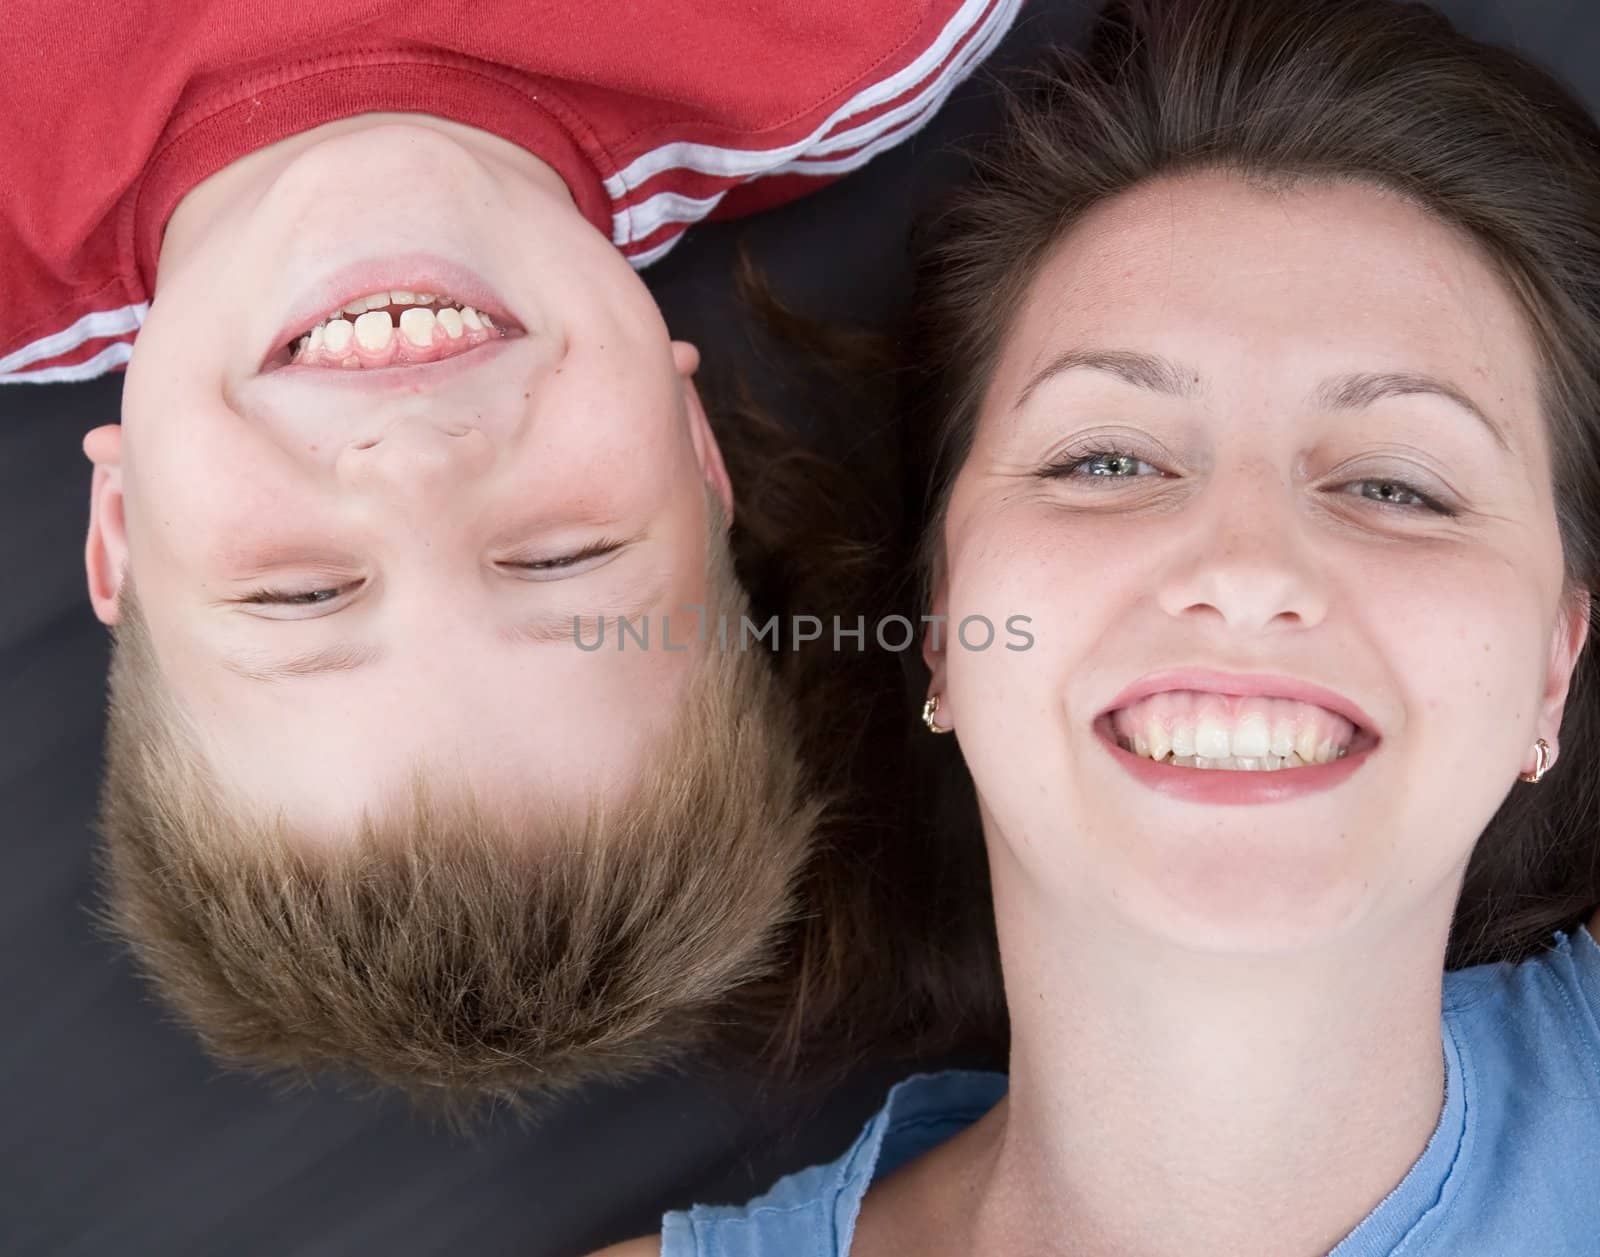 Mum and the son smile by stepanov